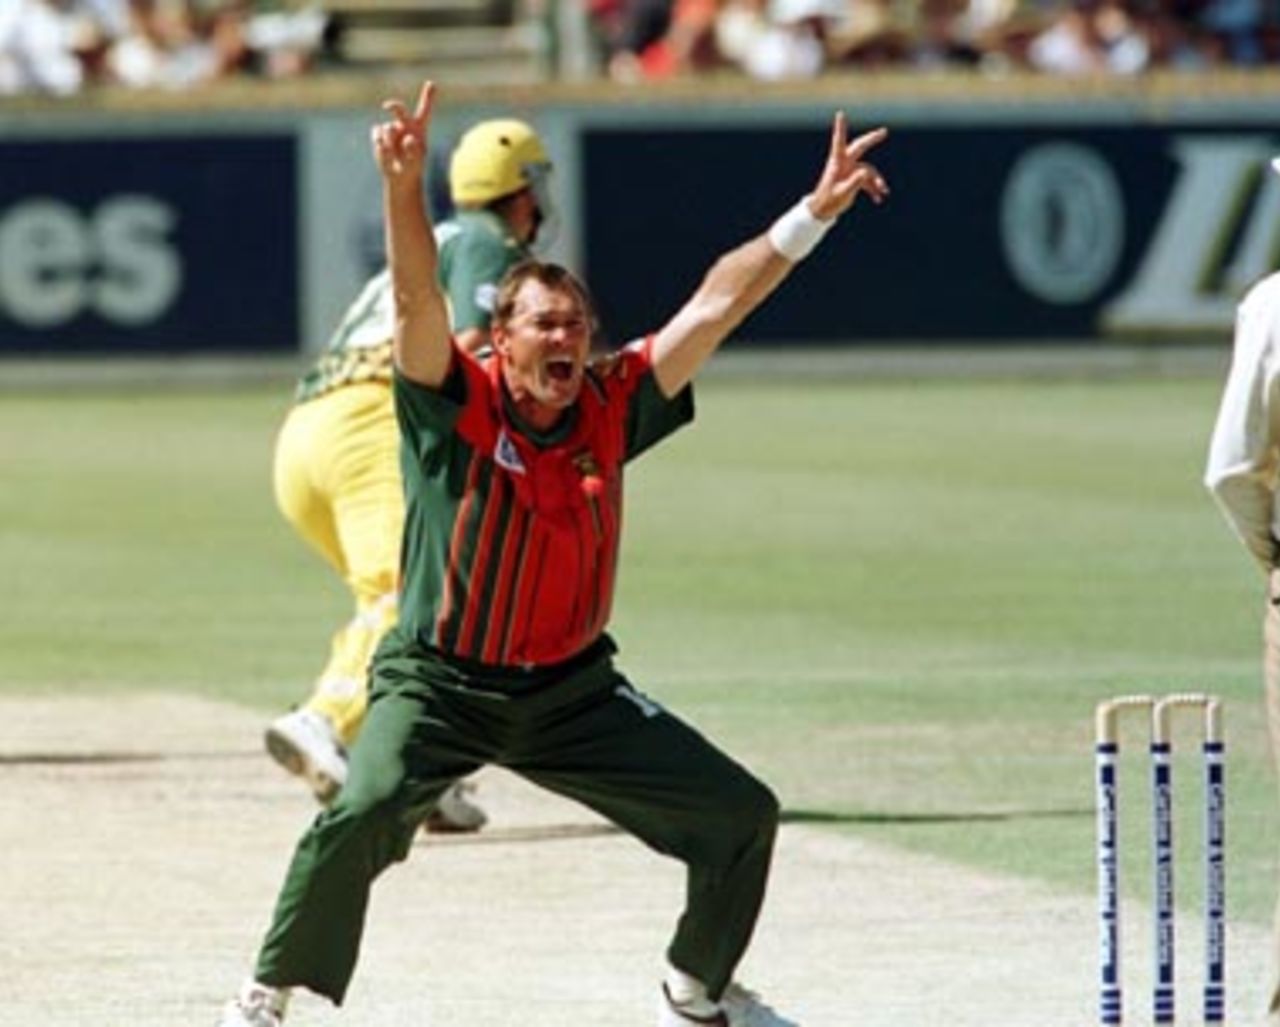 Pat Symcox appeals ...Australia v South Africa d/n ODI at the WACA Ground, Perth, Sunday January 18th 1998.